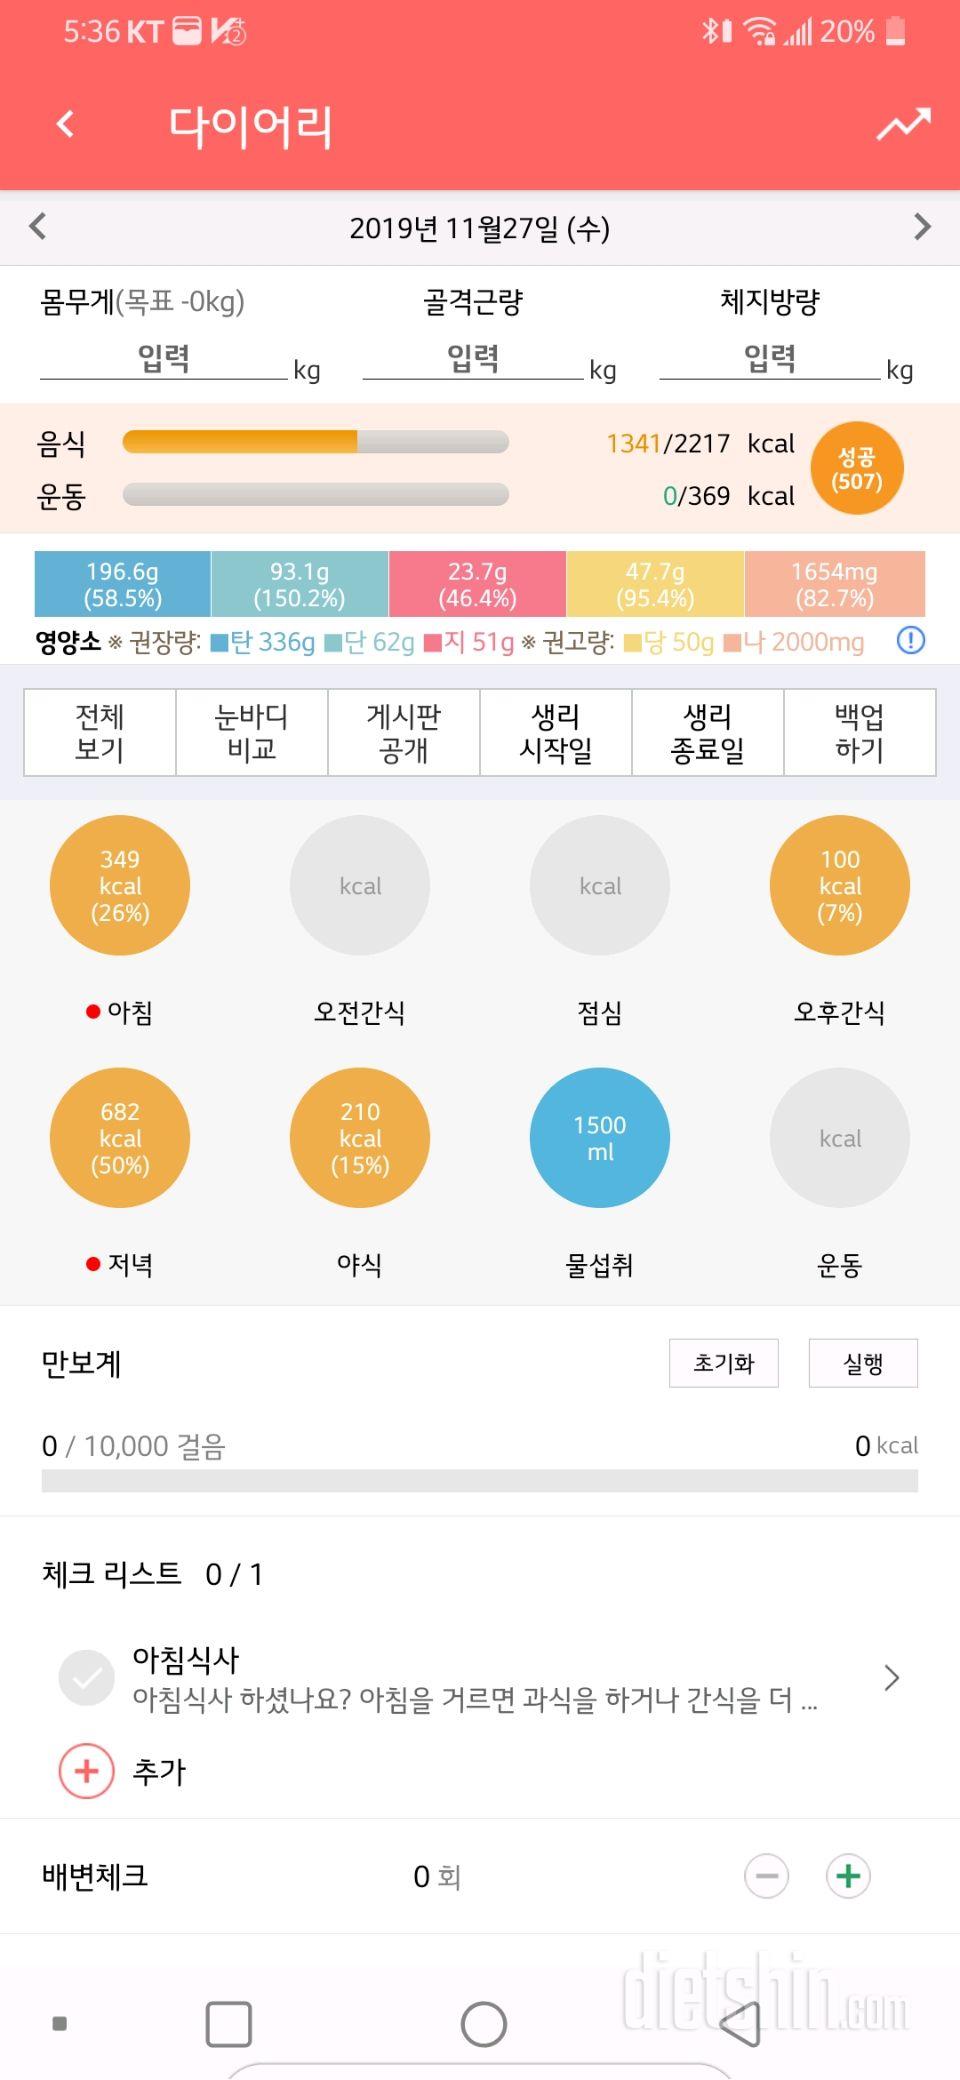 11월 27일 수욜